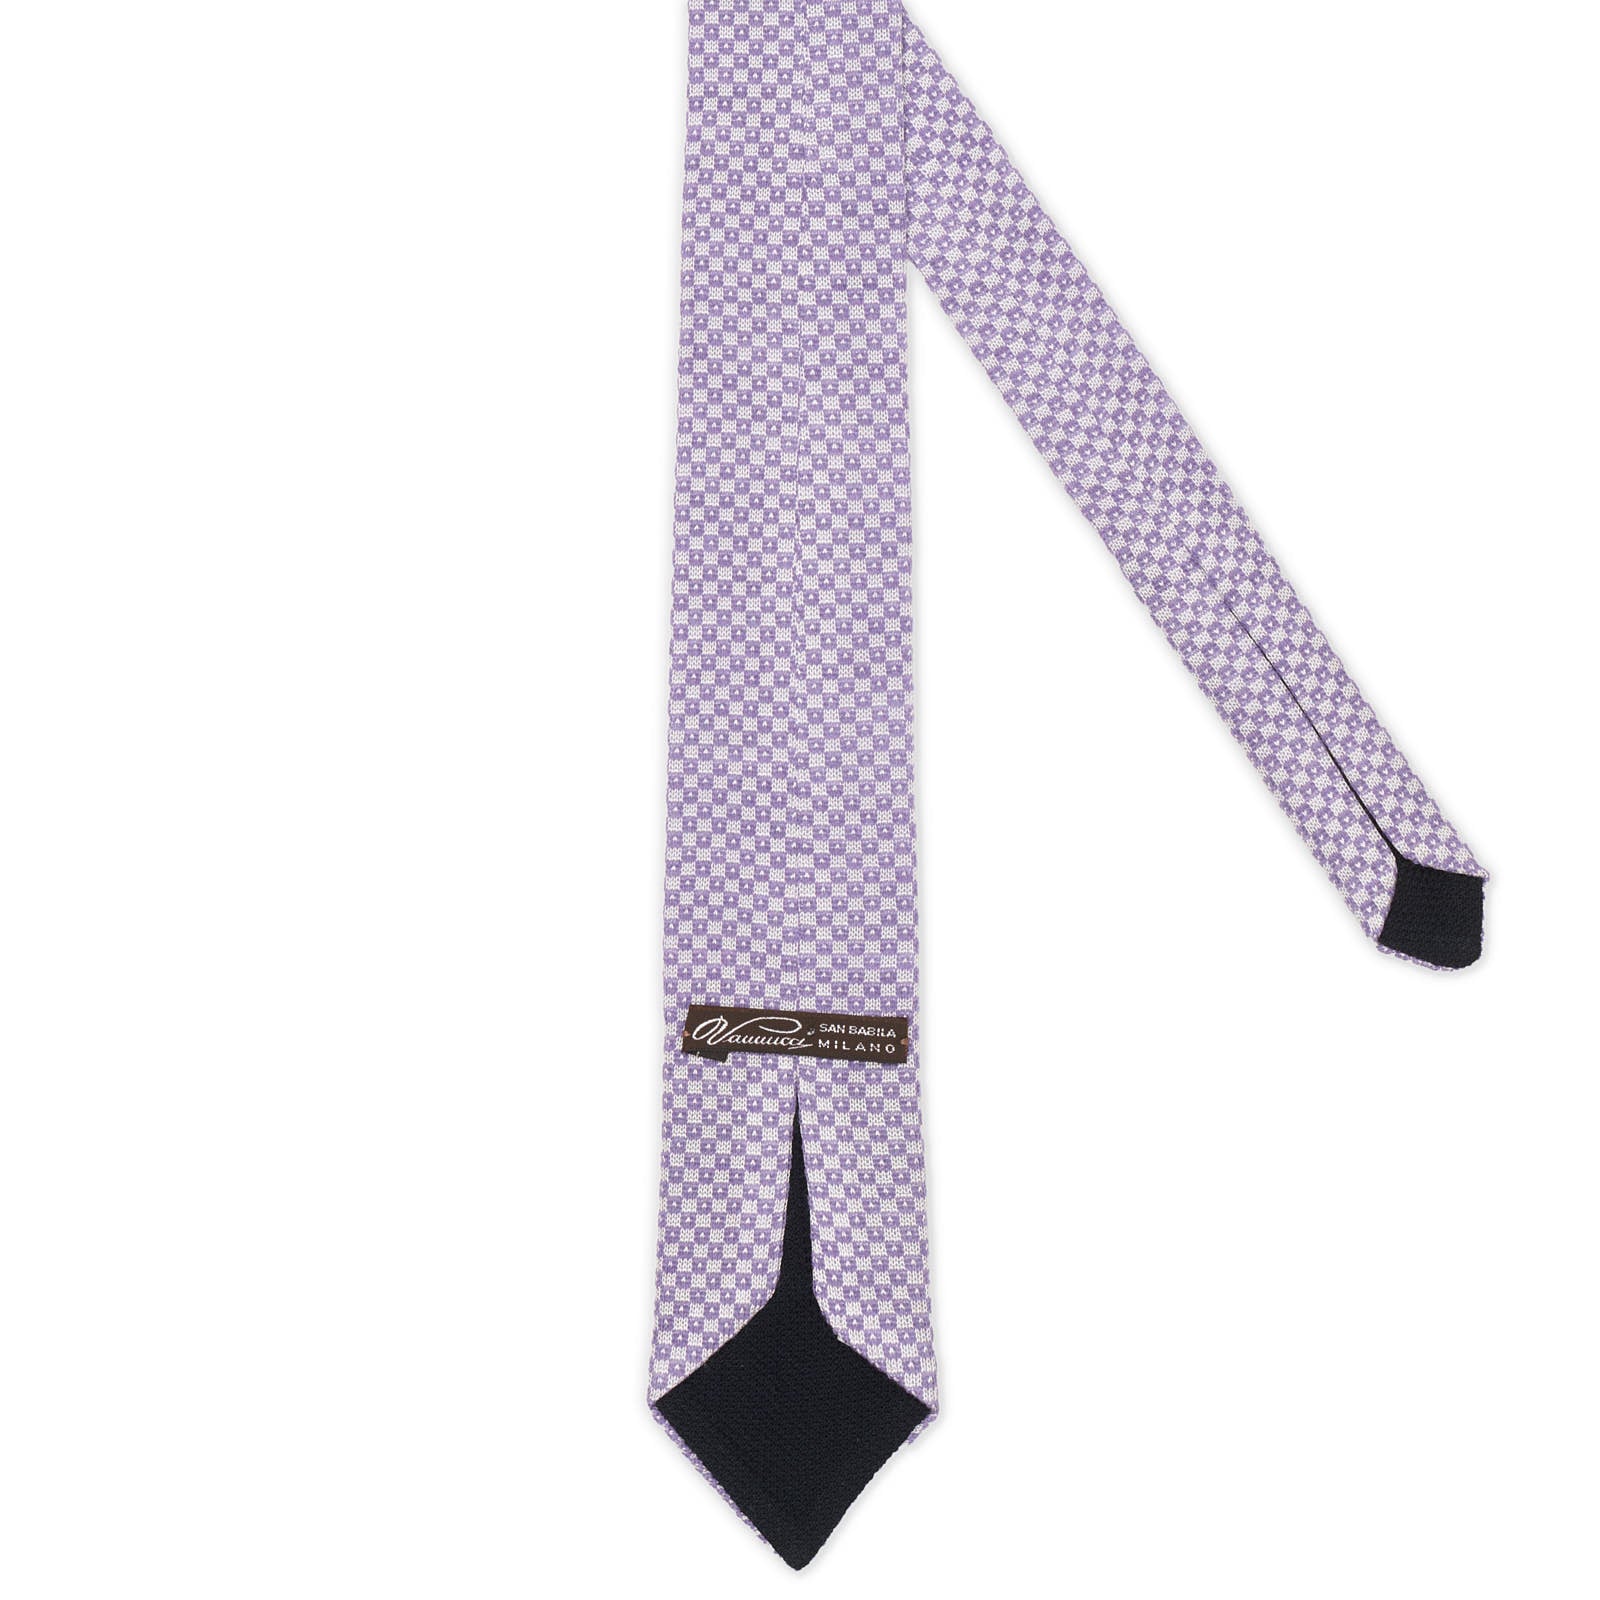 VANNUCCI MILANO Purple Checked Wool Knit Tie NEW